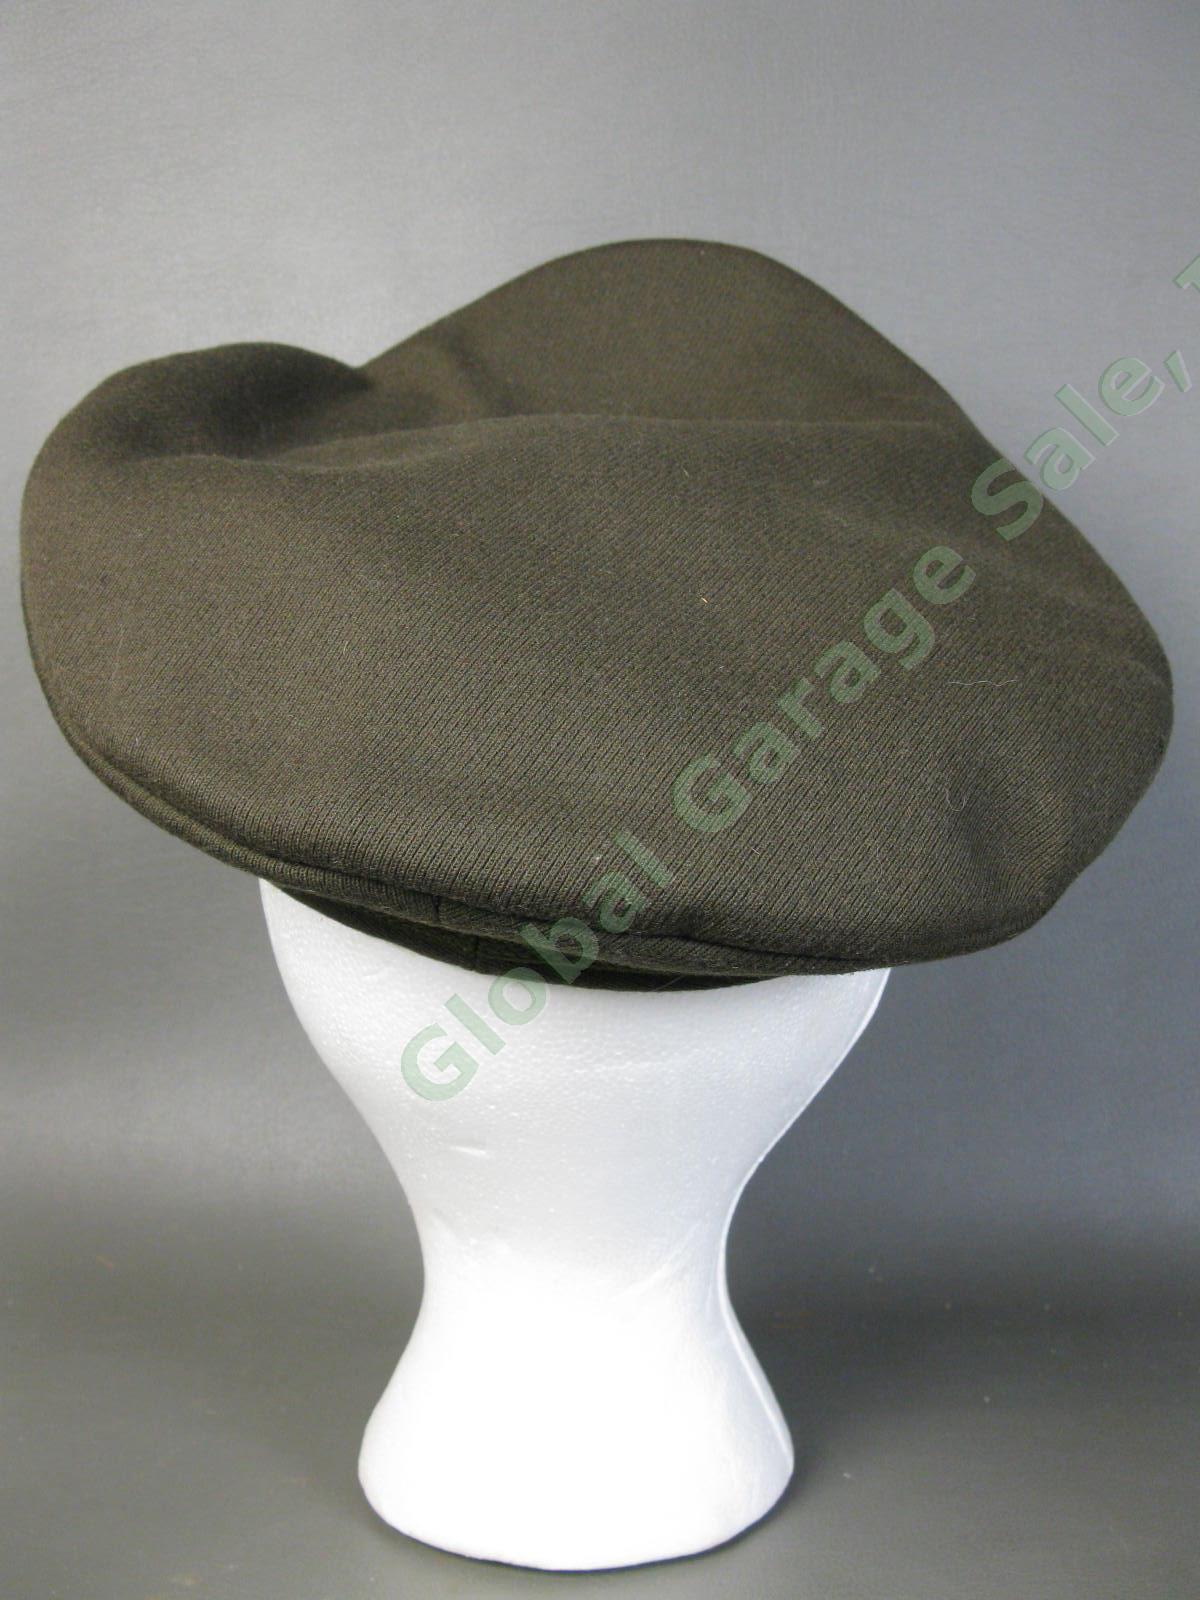 Original WWII 1942 US Army Military Service Officer Wool Olive Drab Dark Cap Hat 2